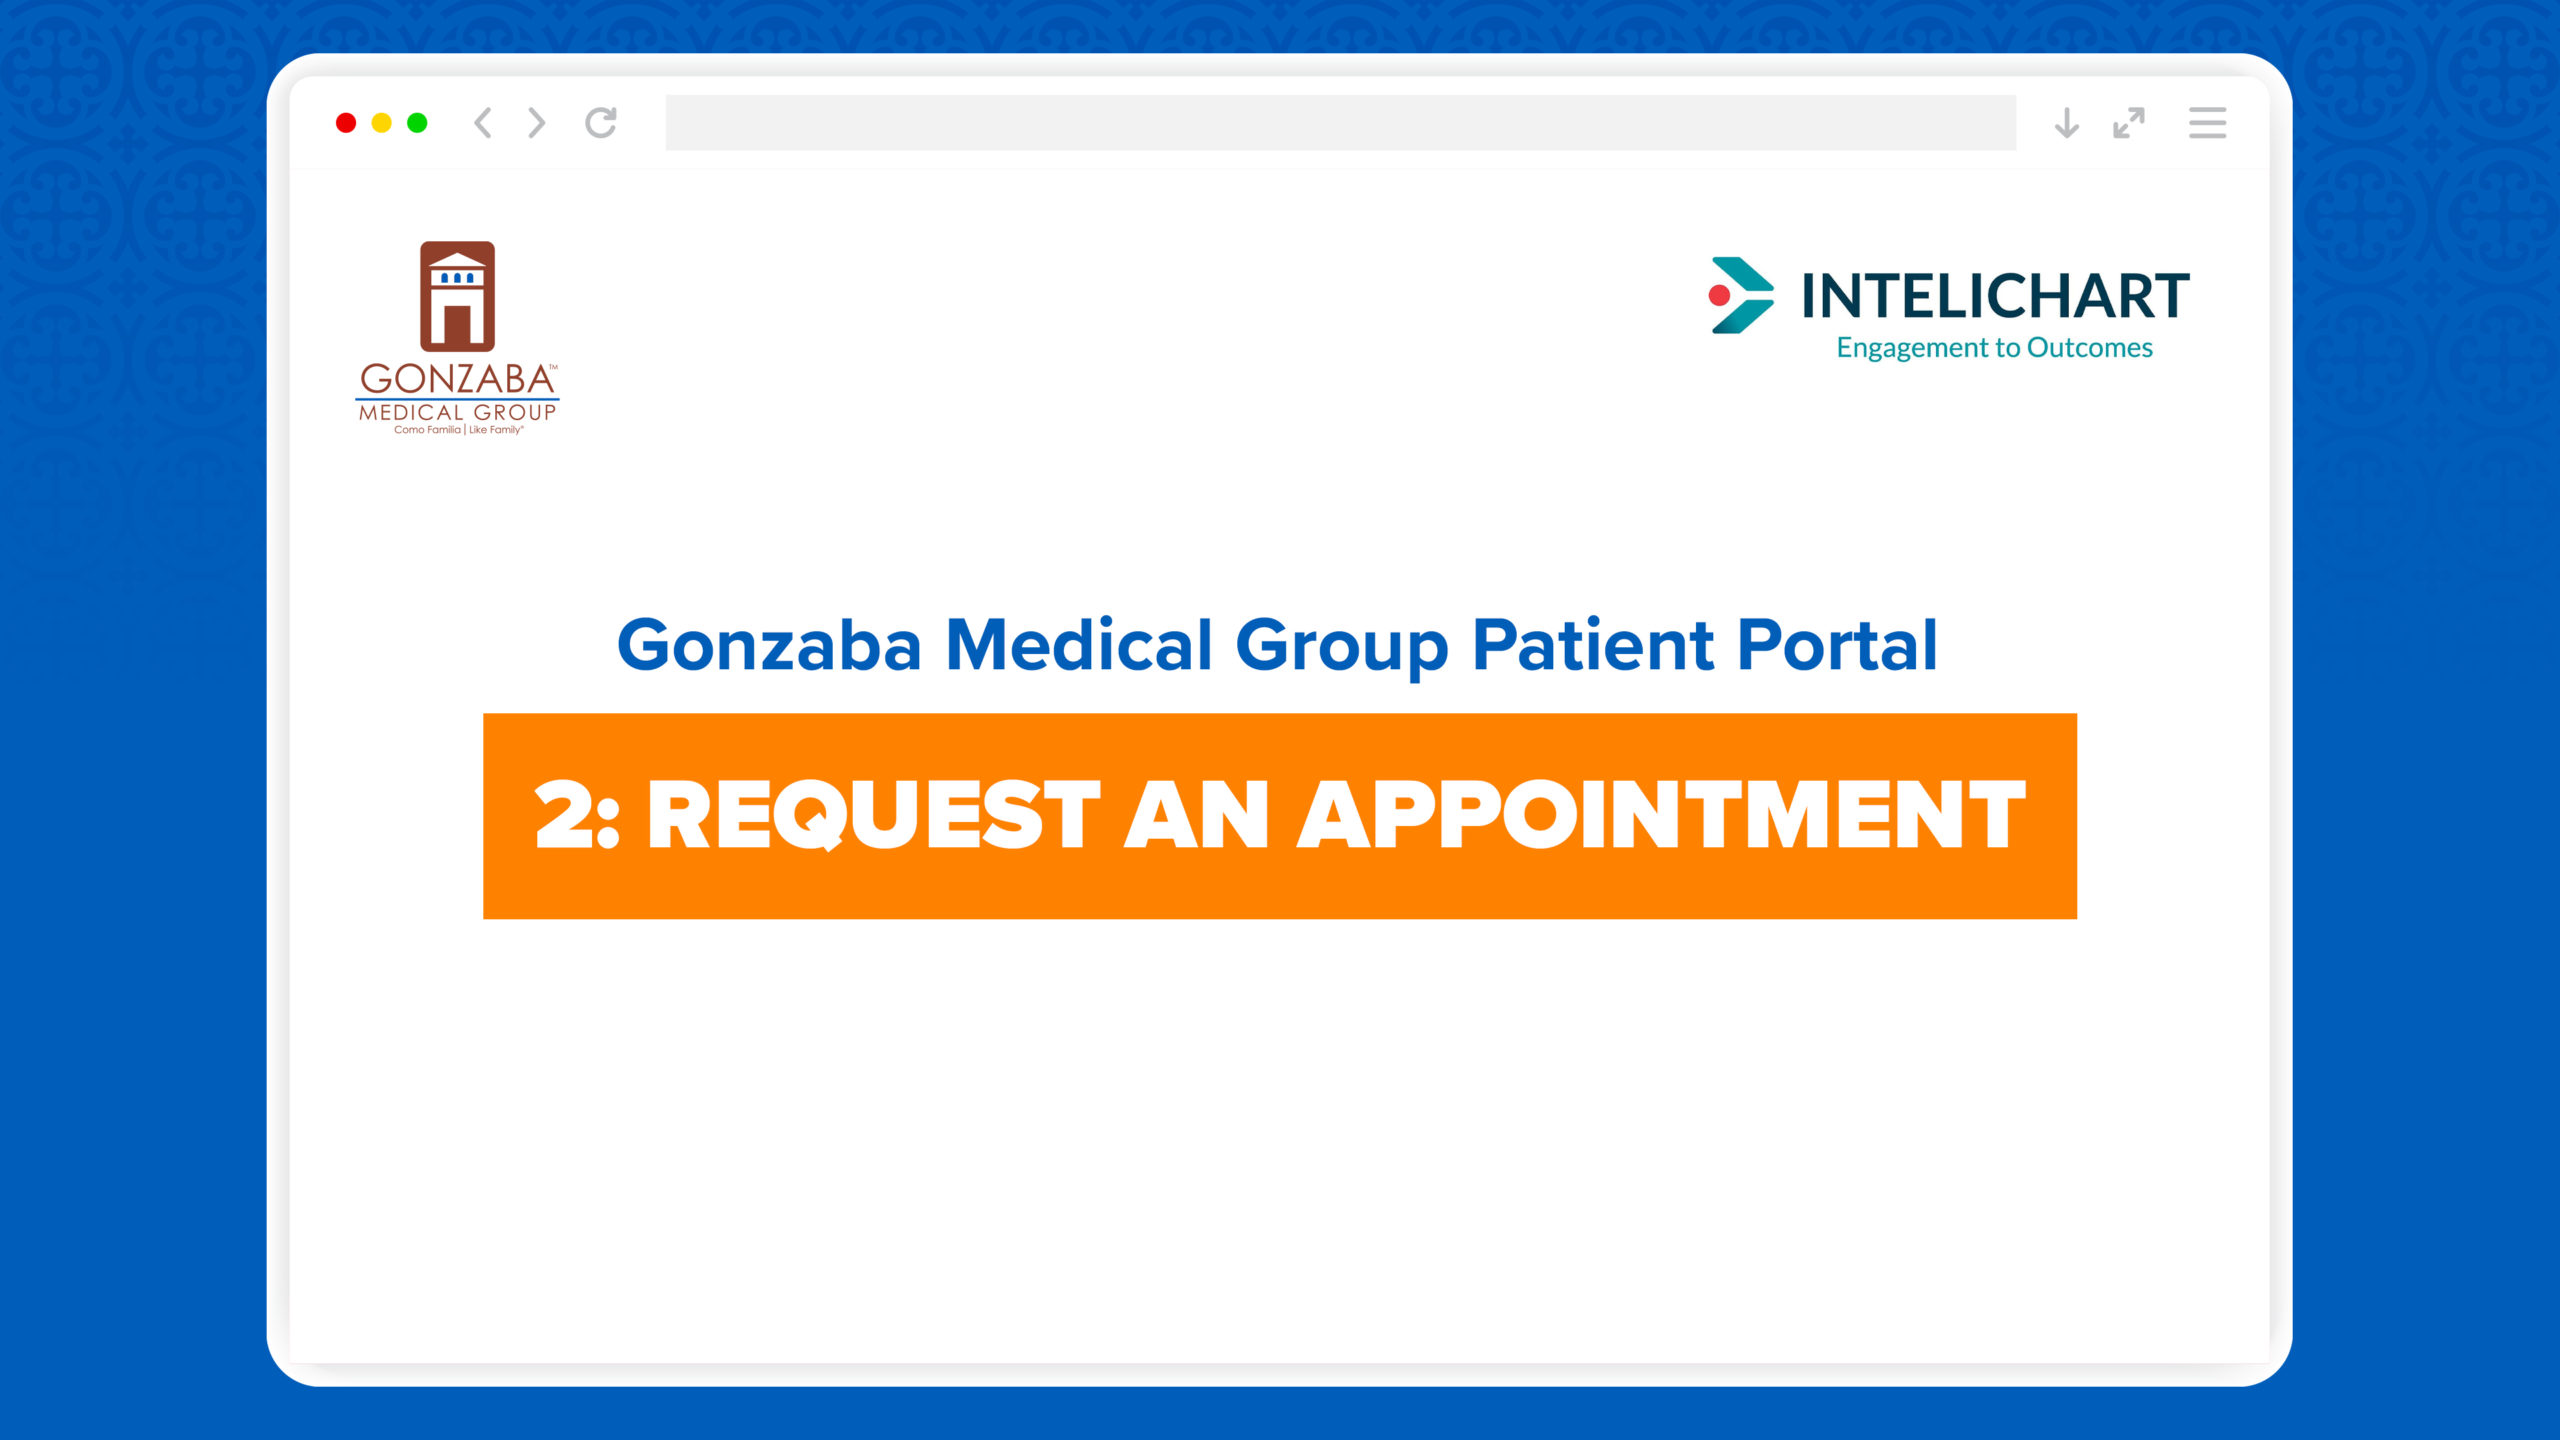 Gonzaba Medical Group Patient Portal: How to Request an Appointment with Intelichart